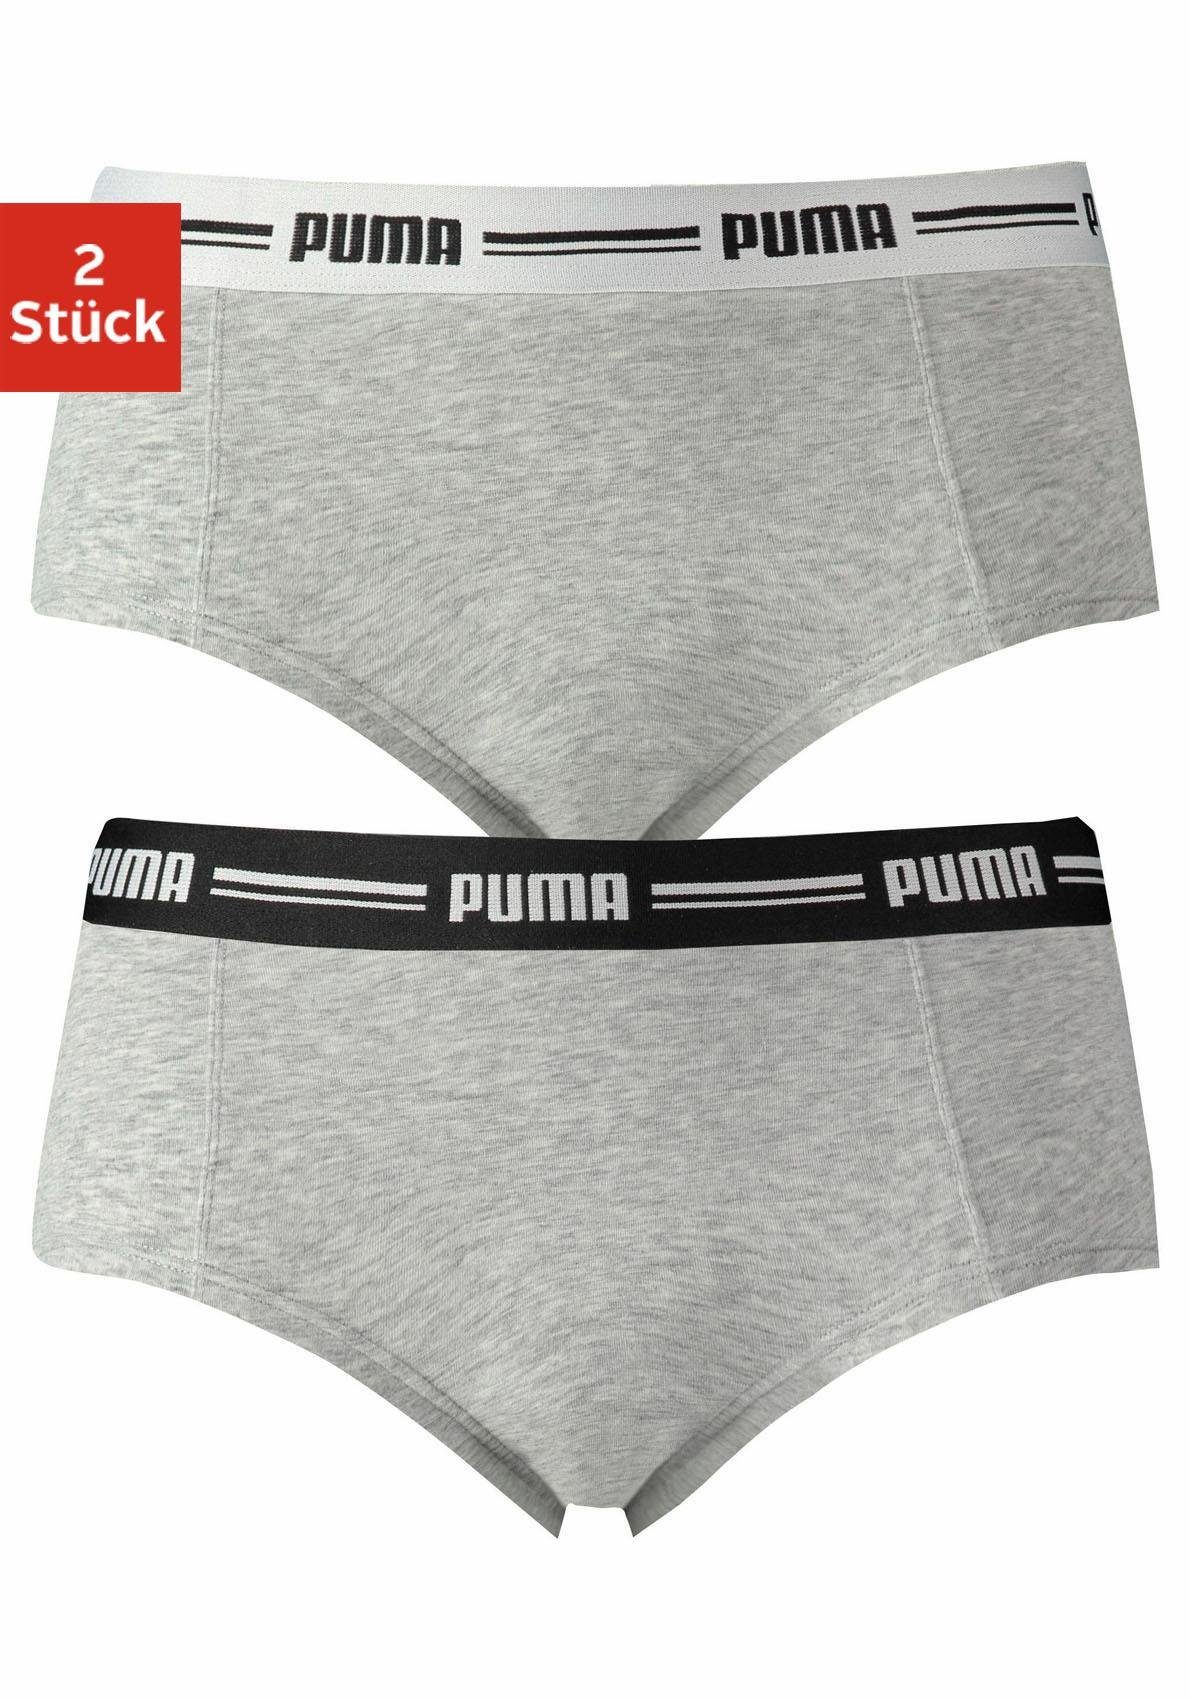 Iconic 2-St) Panty PUMA (Packung, grau-meliert